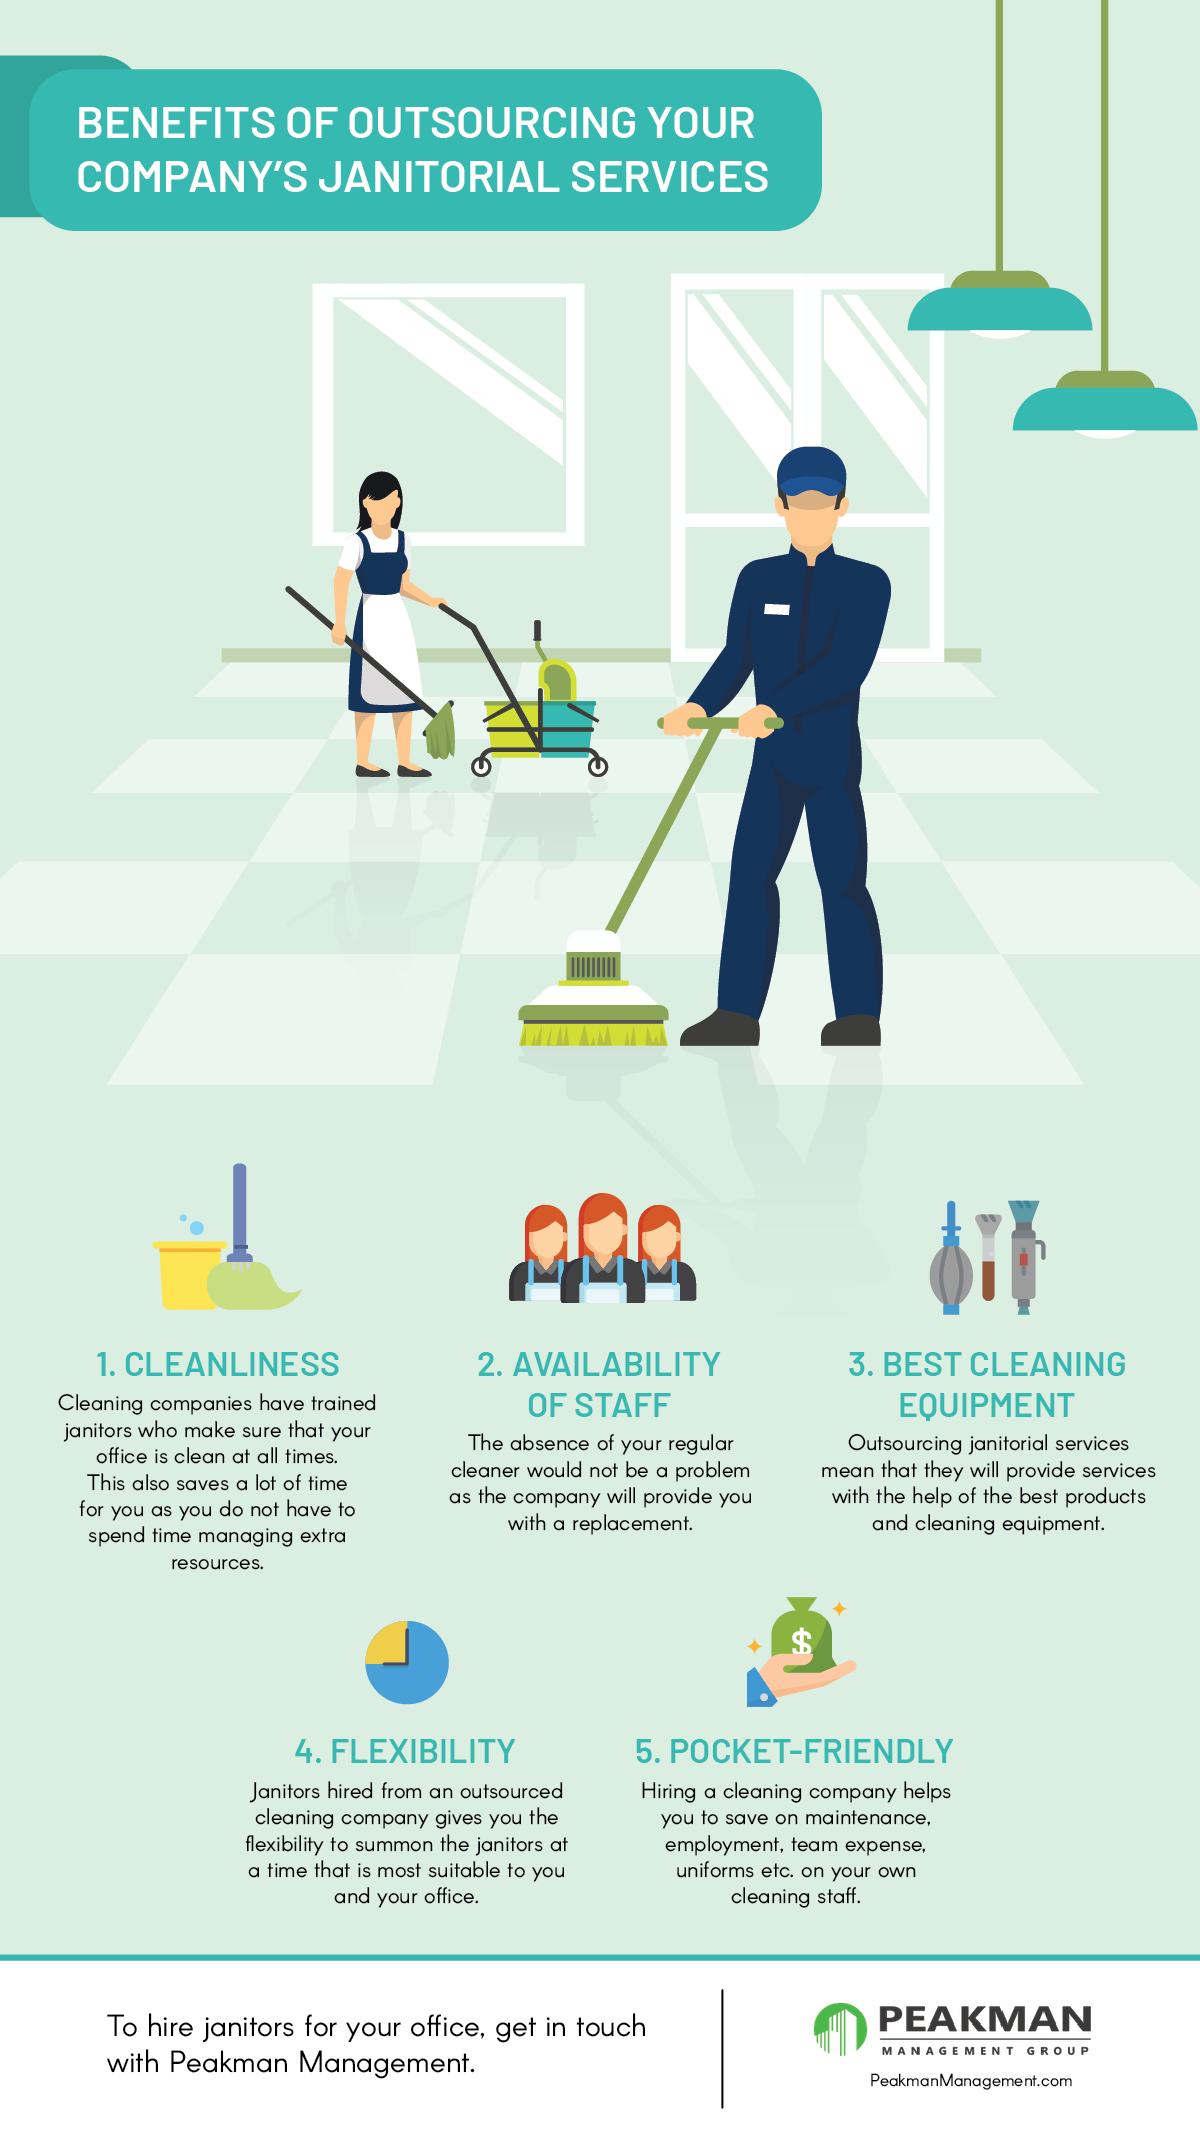 Outsourcing Your Company's Janitorial Services